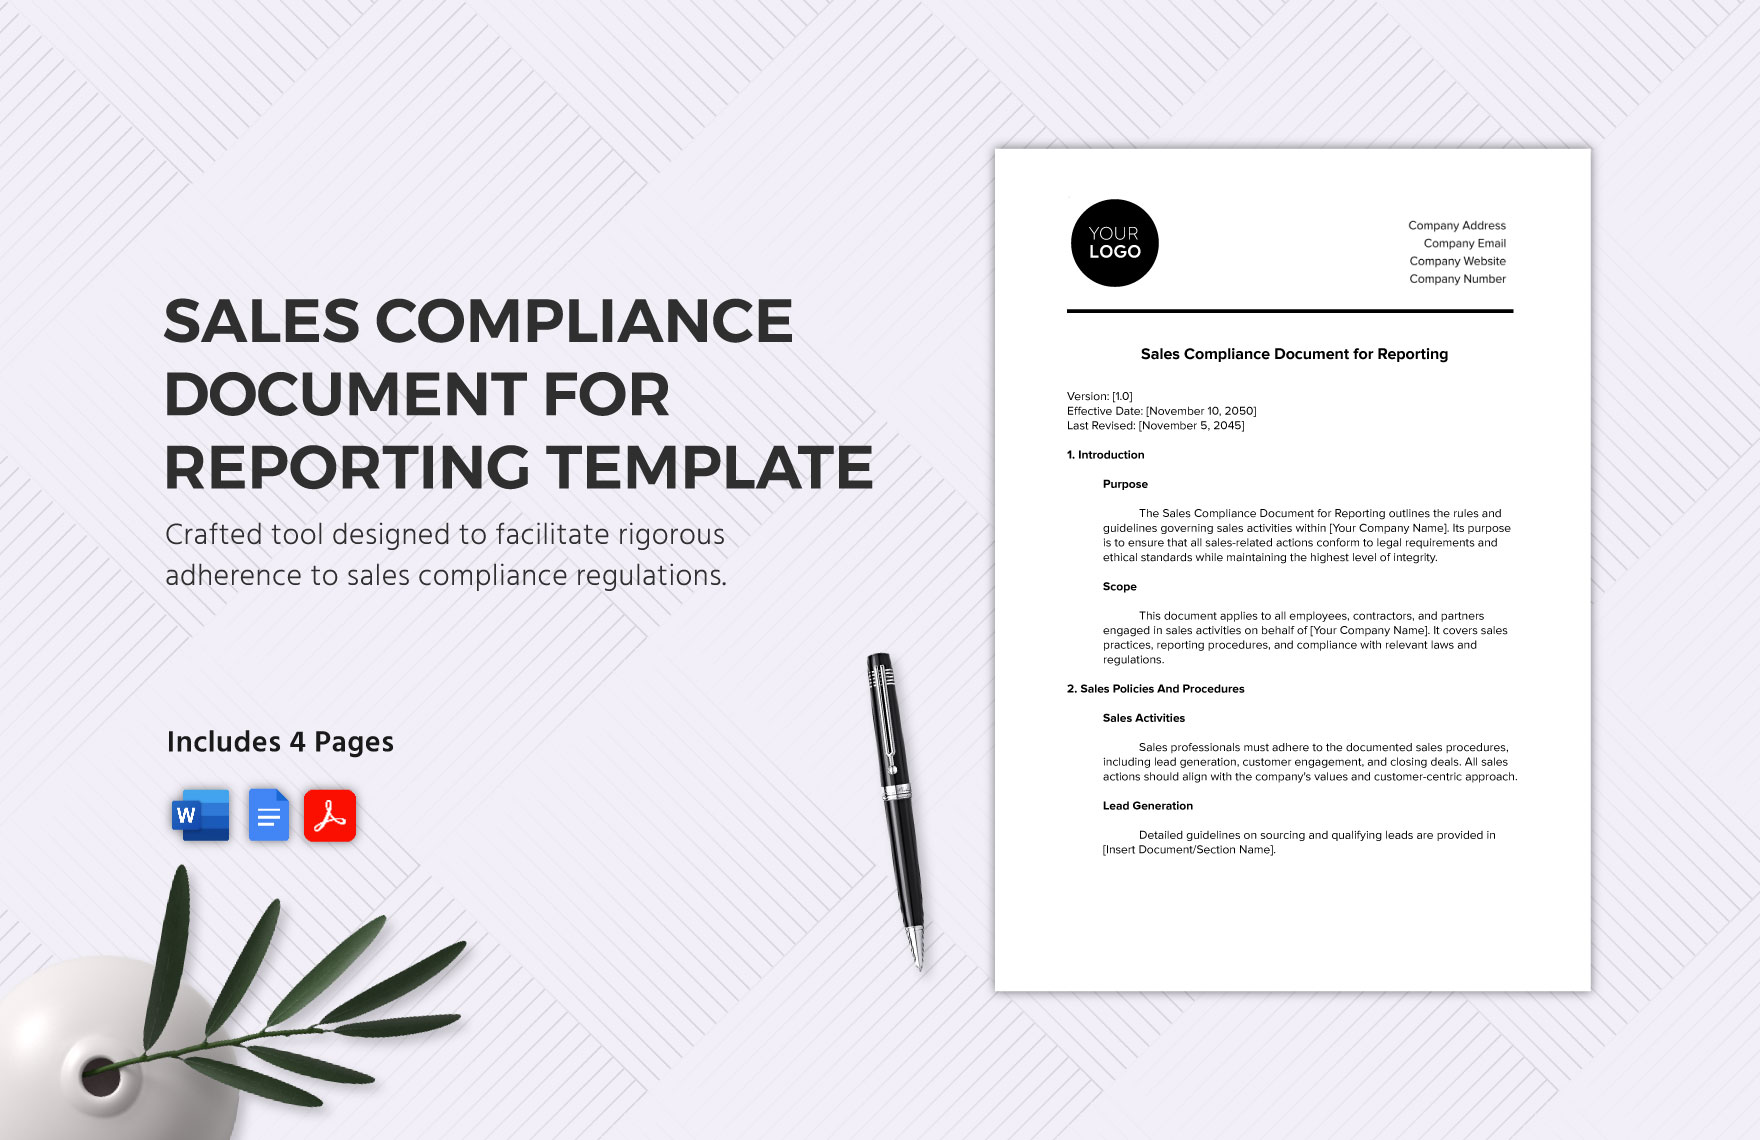 Sales Compliance Document for Reporting Template in Word, Google Docs, PDF